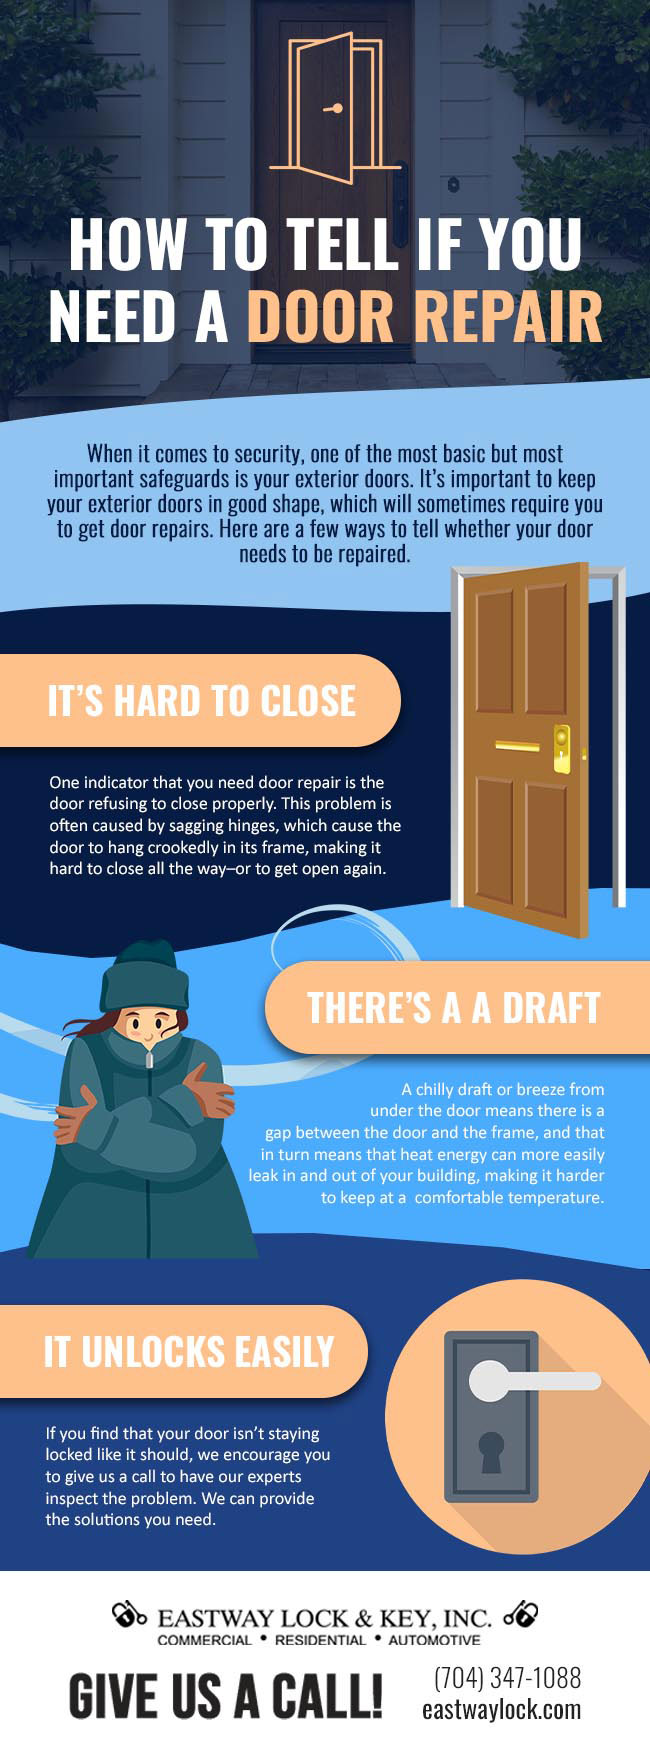 How to Tell if You Need Door Repair